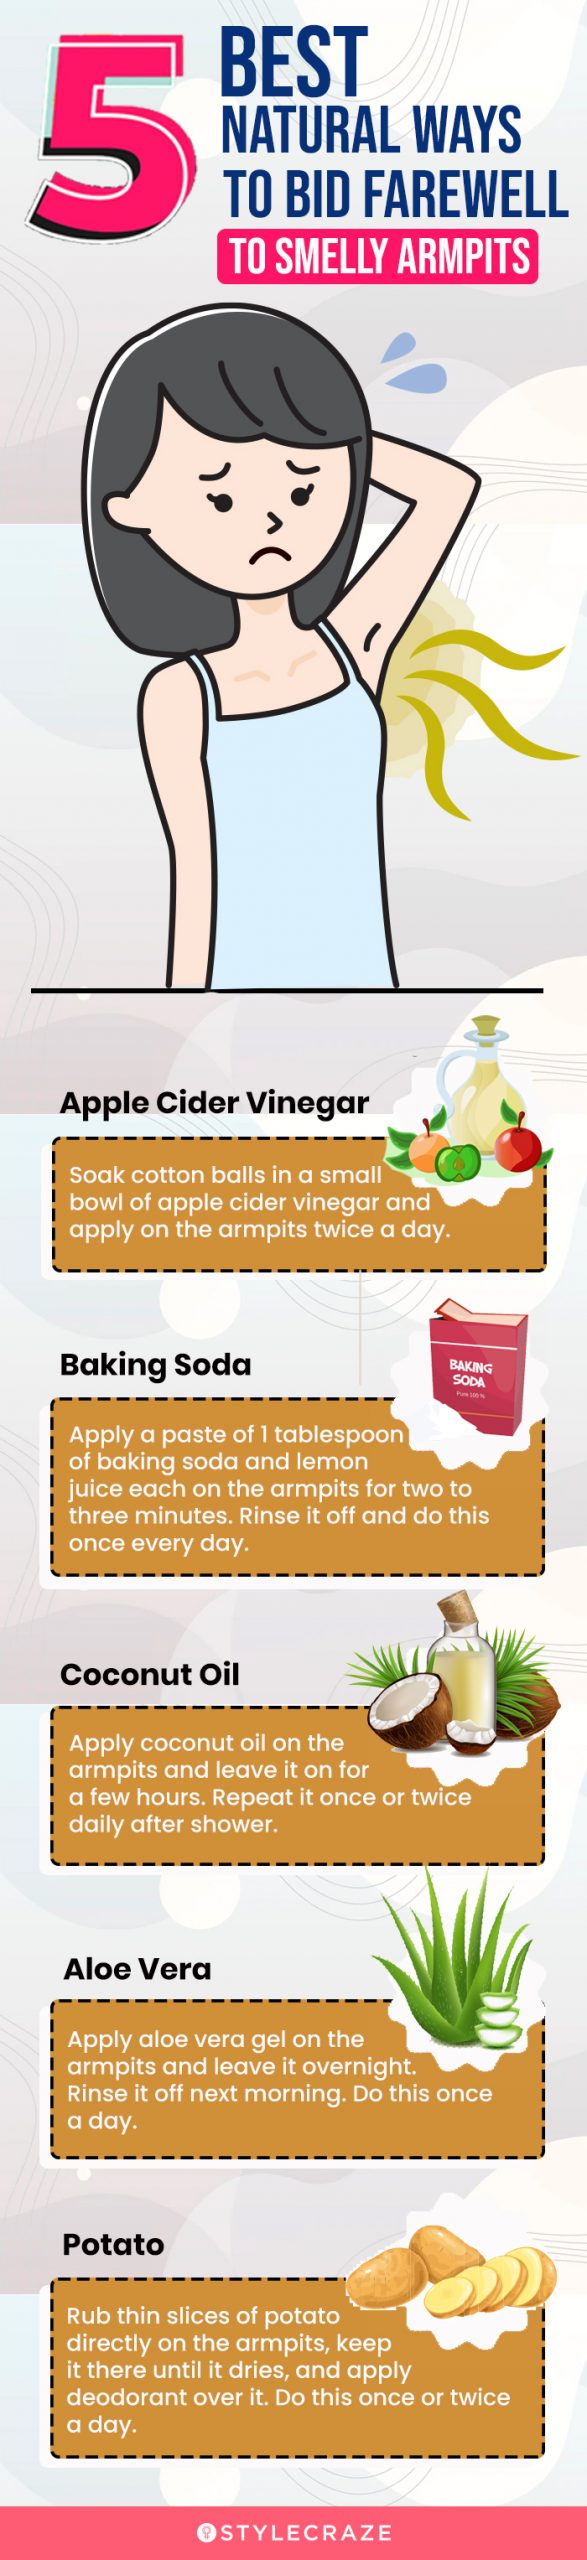 best 5 natural ways to bid farewell to smelly armpits [infographic]